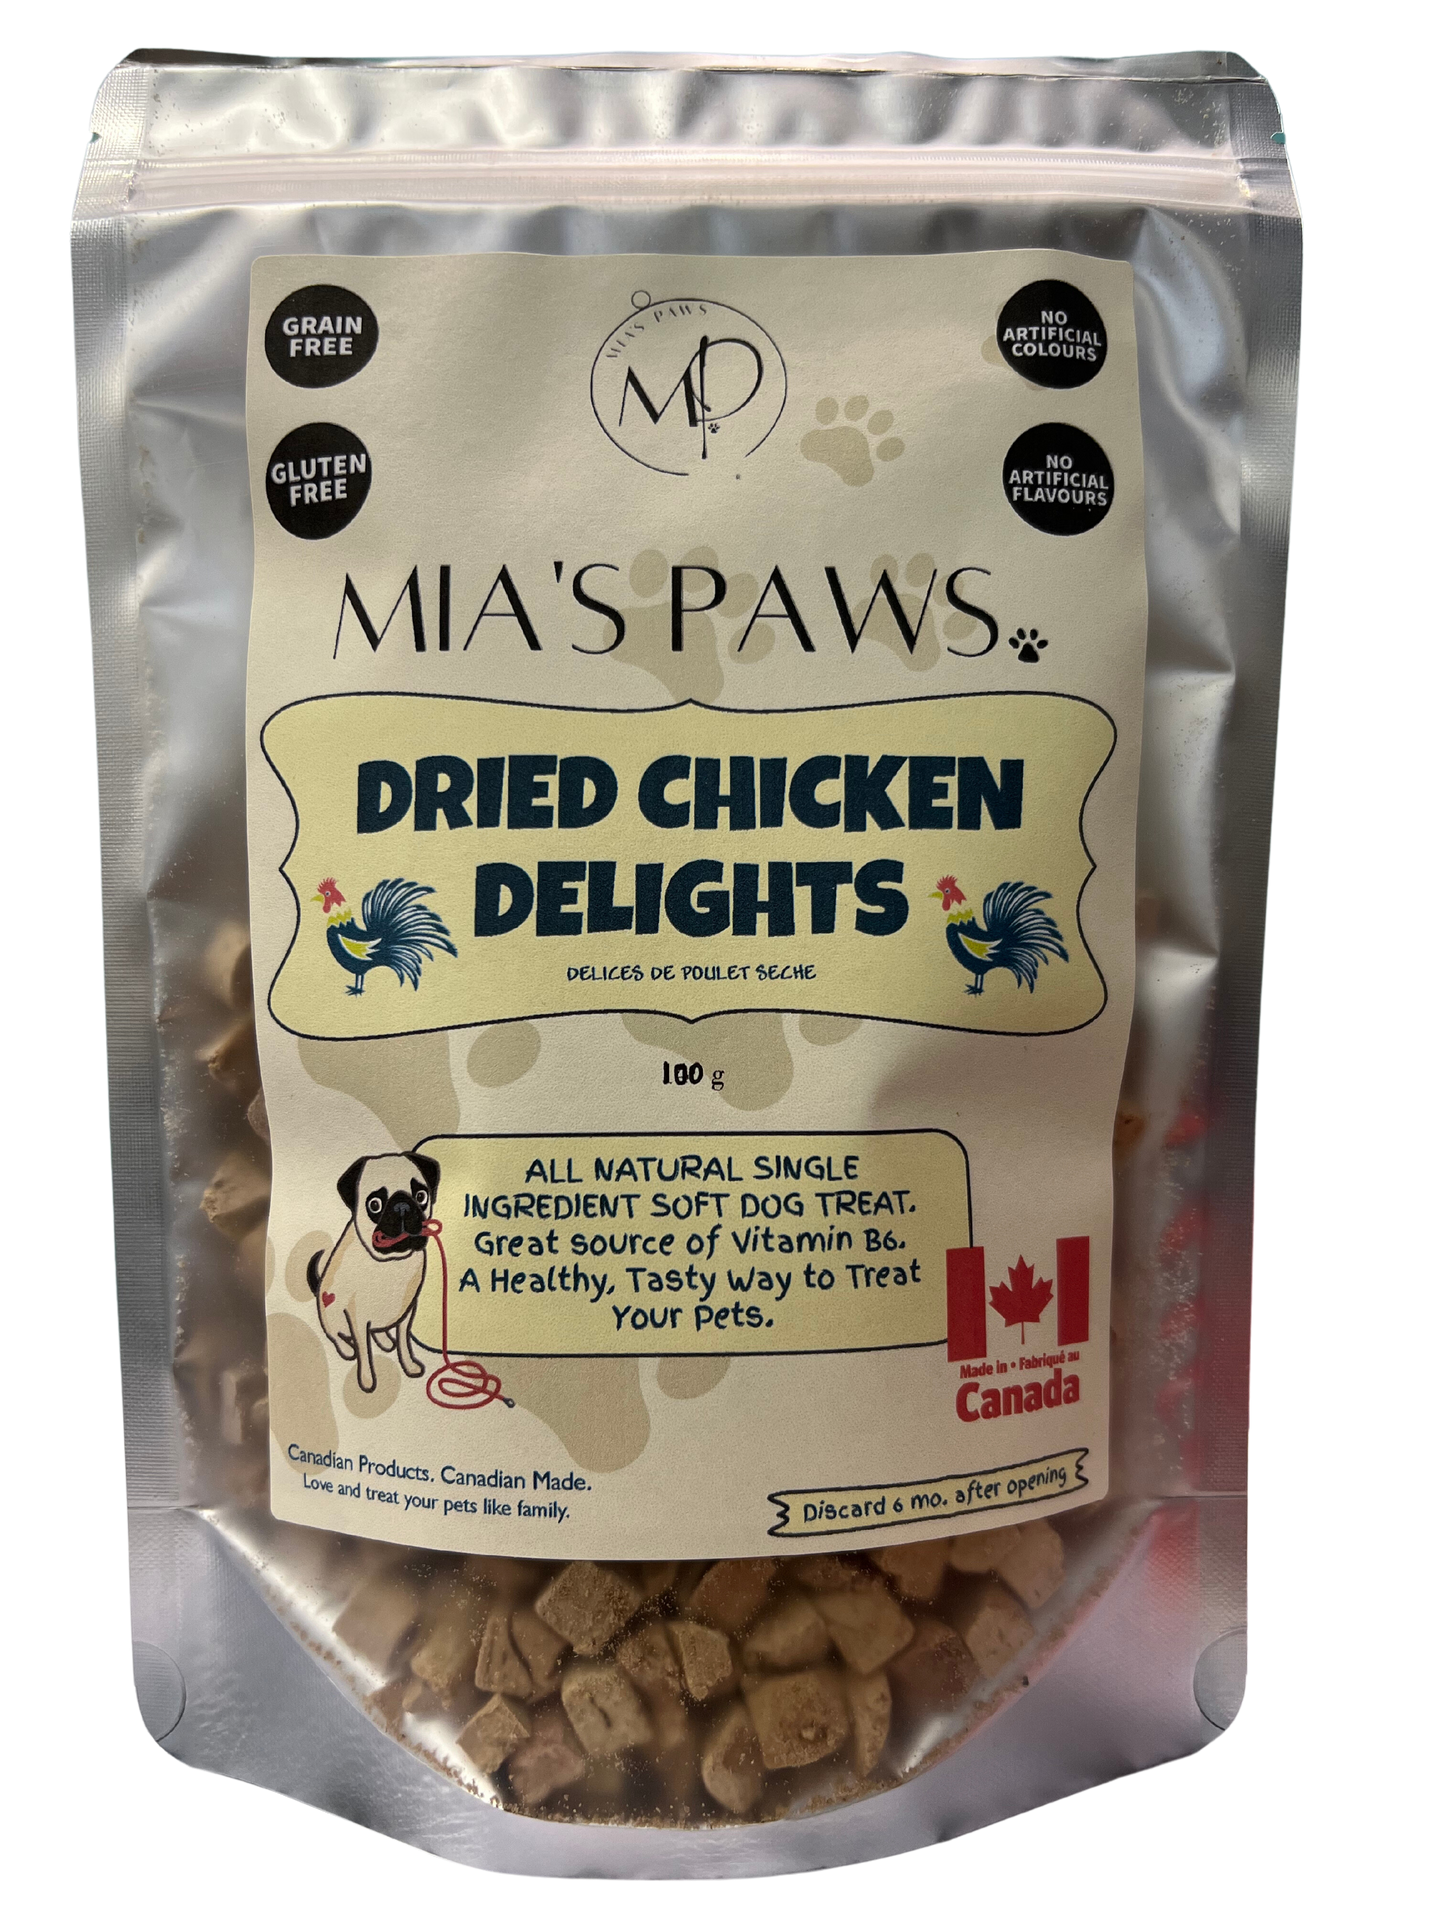 Dried Chicken Delights - Mia's Paws